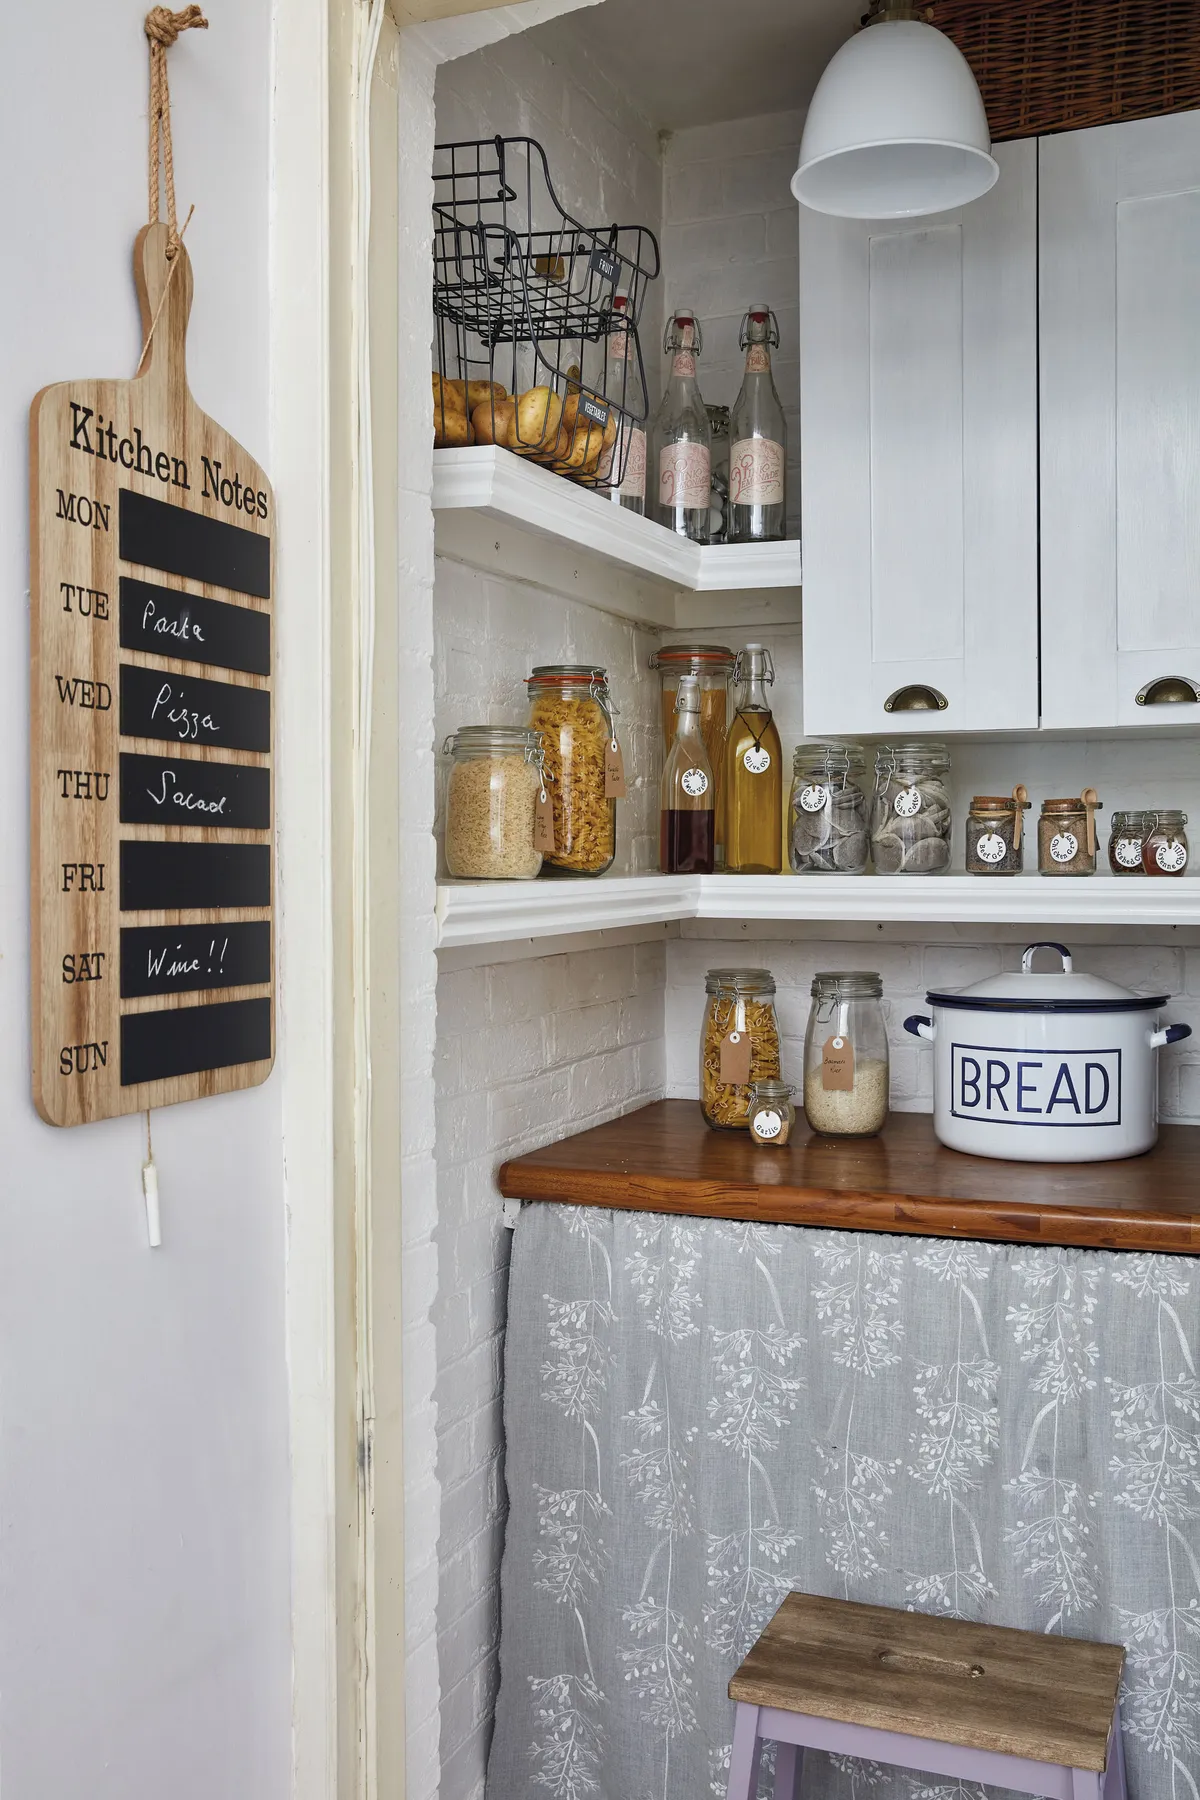 The little pantry provides much-needed storage space in the kitchen. ‘It used to have everything just thrown in there, until we put in the little cupboards, re-did the shelving and changed the light fitting,’ Sharon says. ‘The wooden worktop was covered by ugly vinyl plastic, which we peeled off.’ The little curtain hides the washing machine